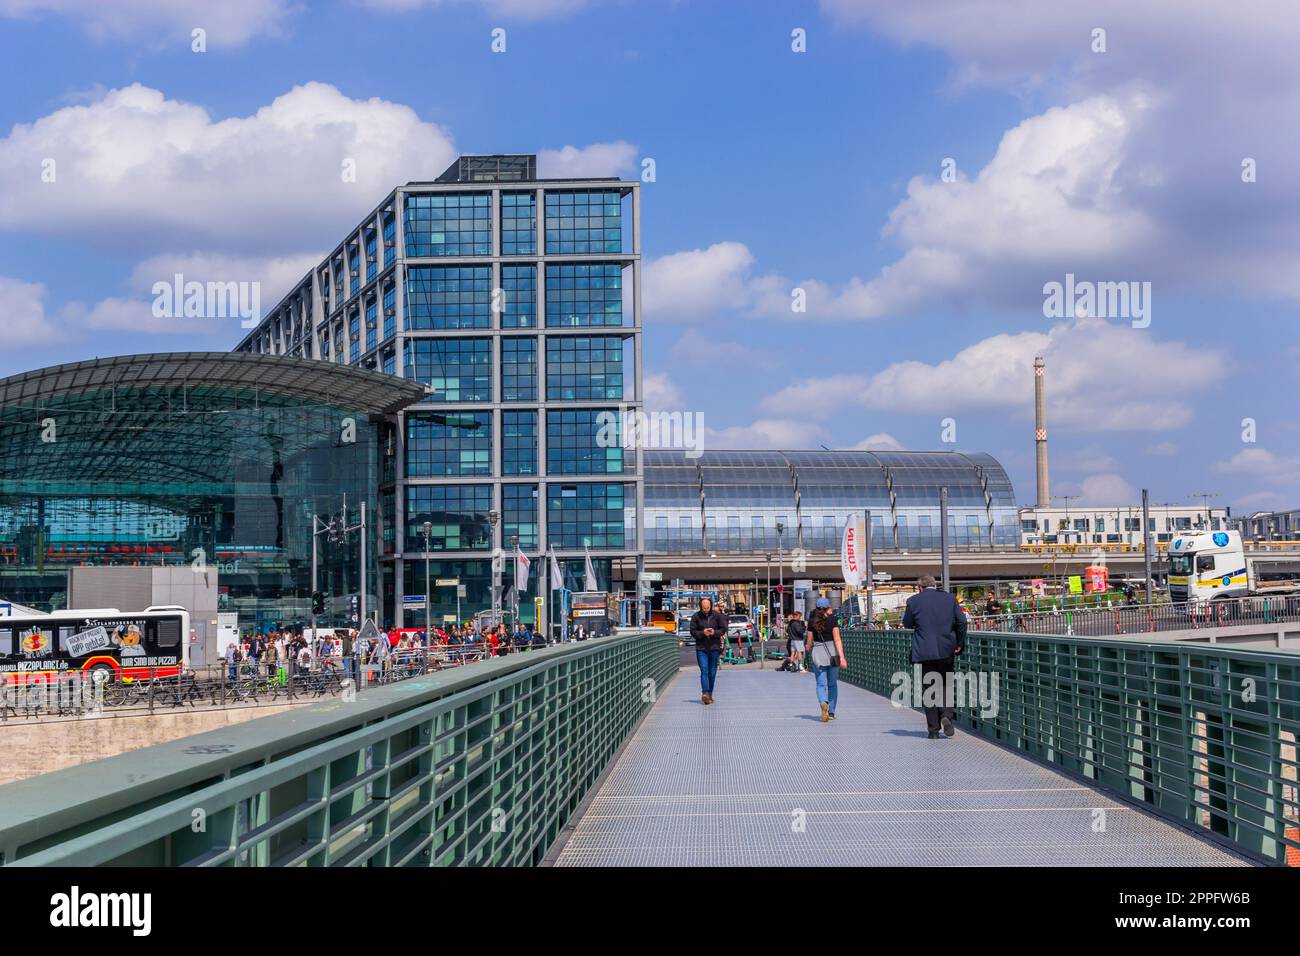 Central train station in Berlin Stock Photo